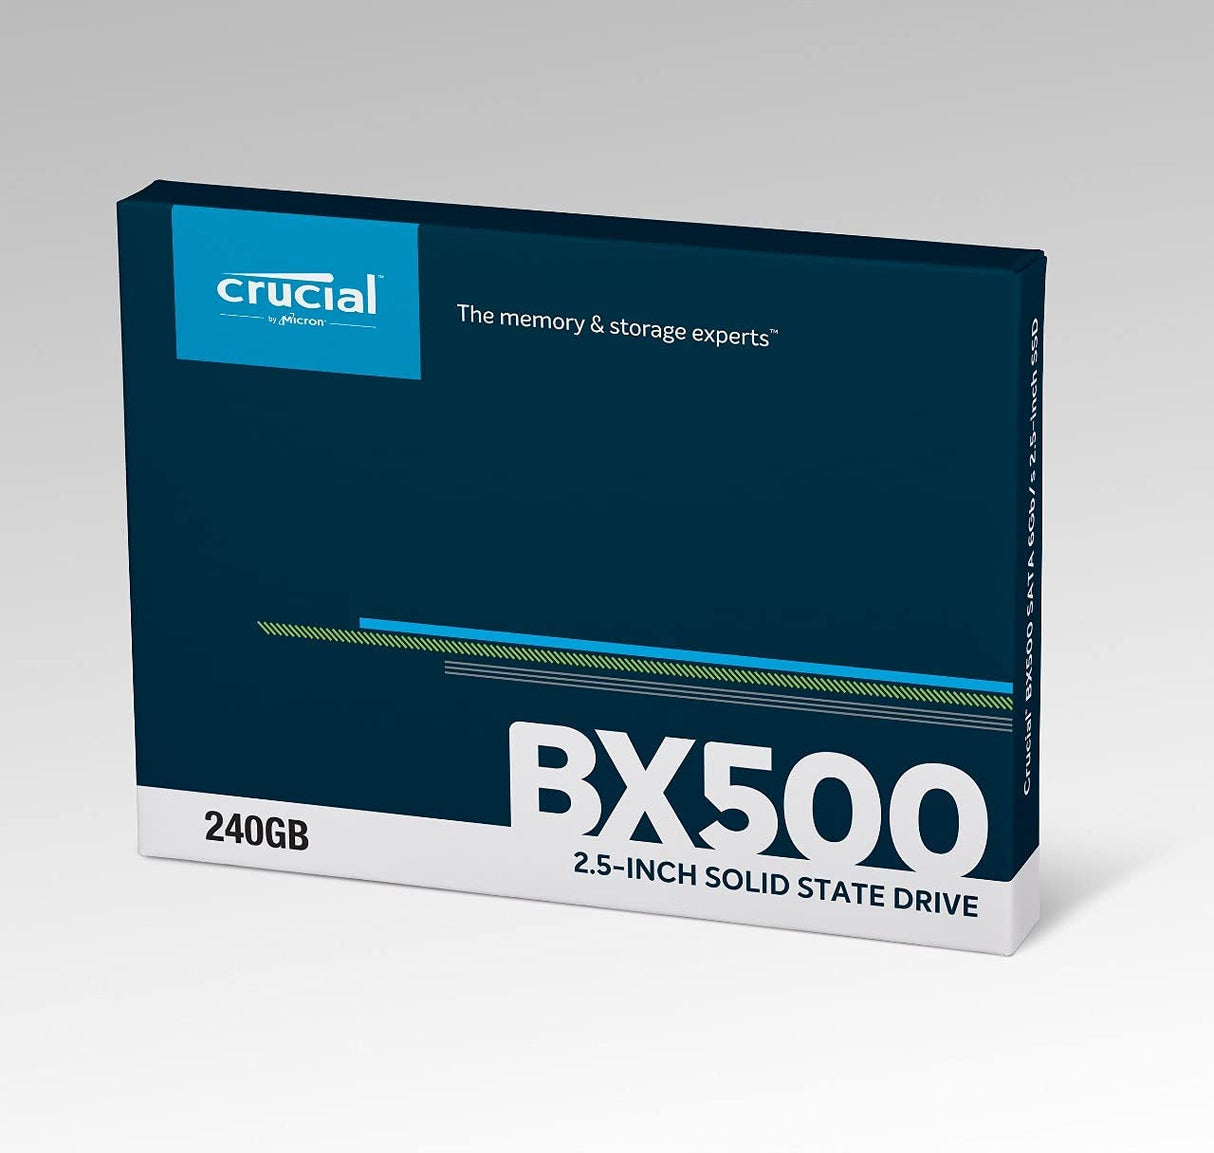 Crucial BX500 240GB 3D NAND SATA 2.5-Inch Internal SSD, up to 540MB/s - CT240BX500SSD1 240GB Standard Packaging